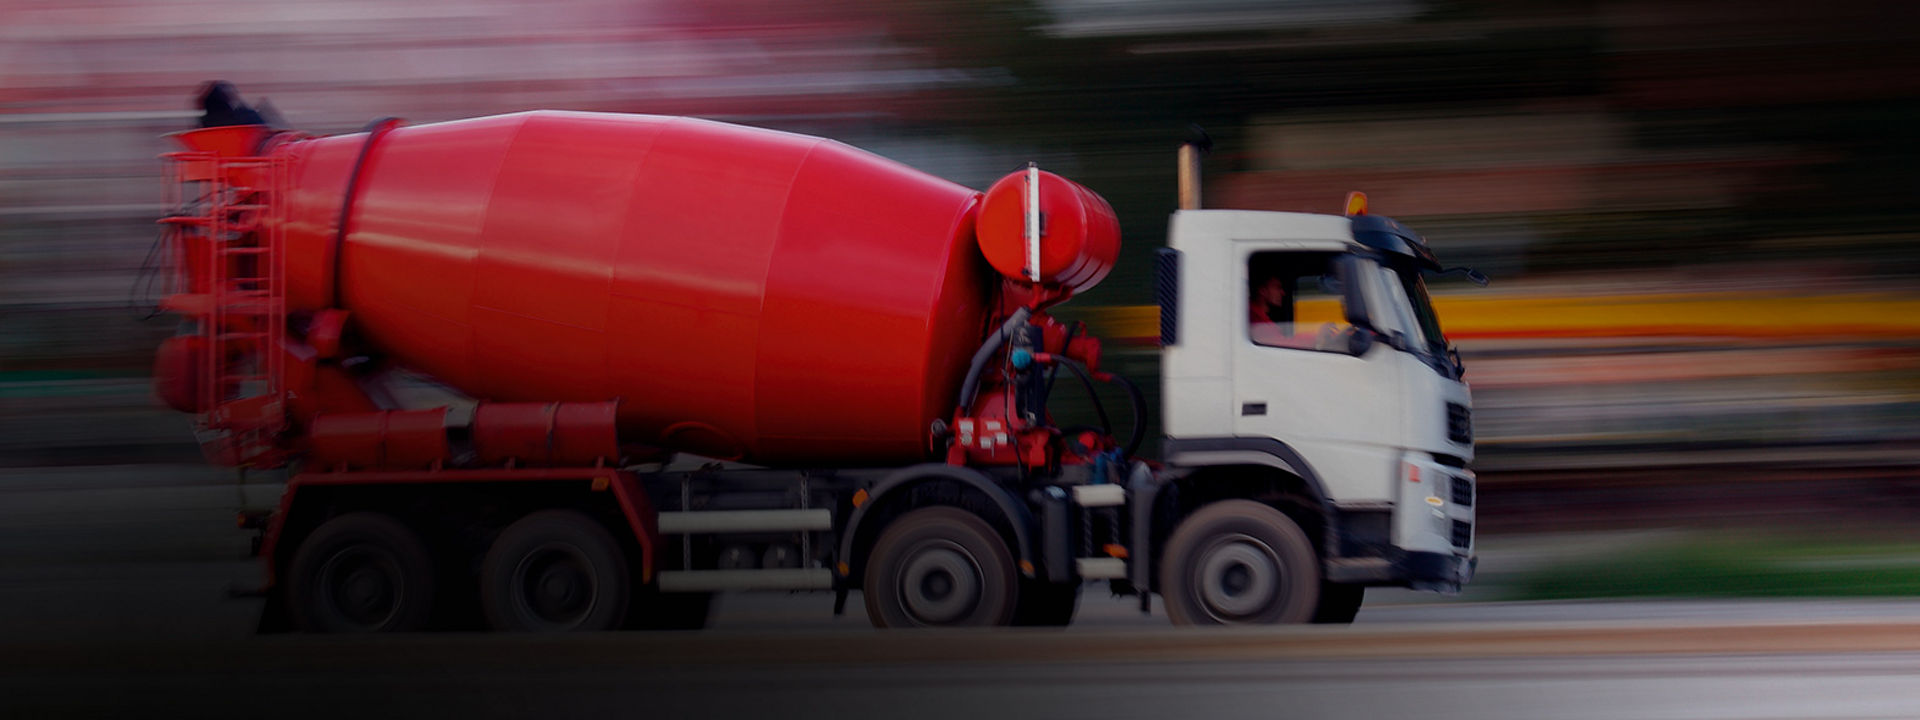 This image shows a cement truck with Bridgestone mild on/off road tyres driving on a highway to a worksite.